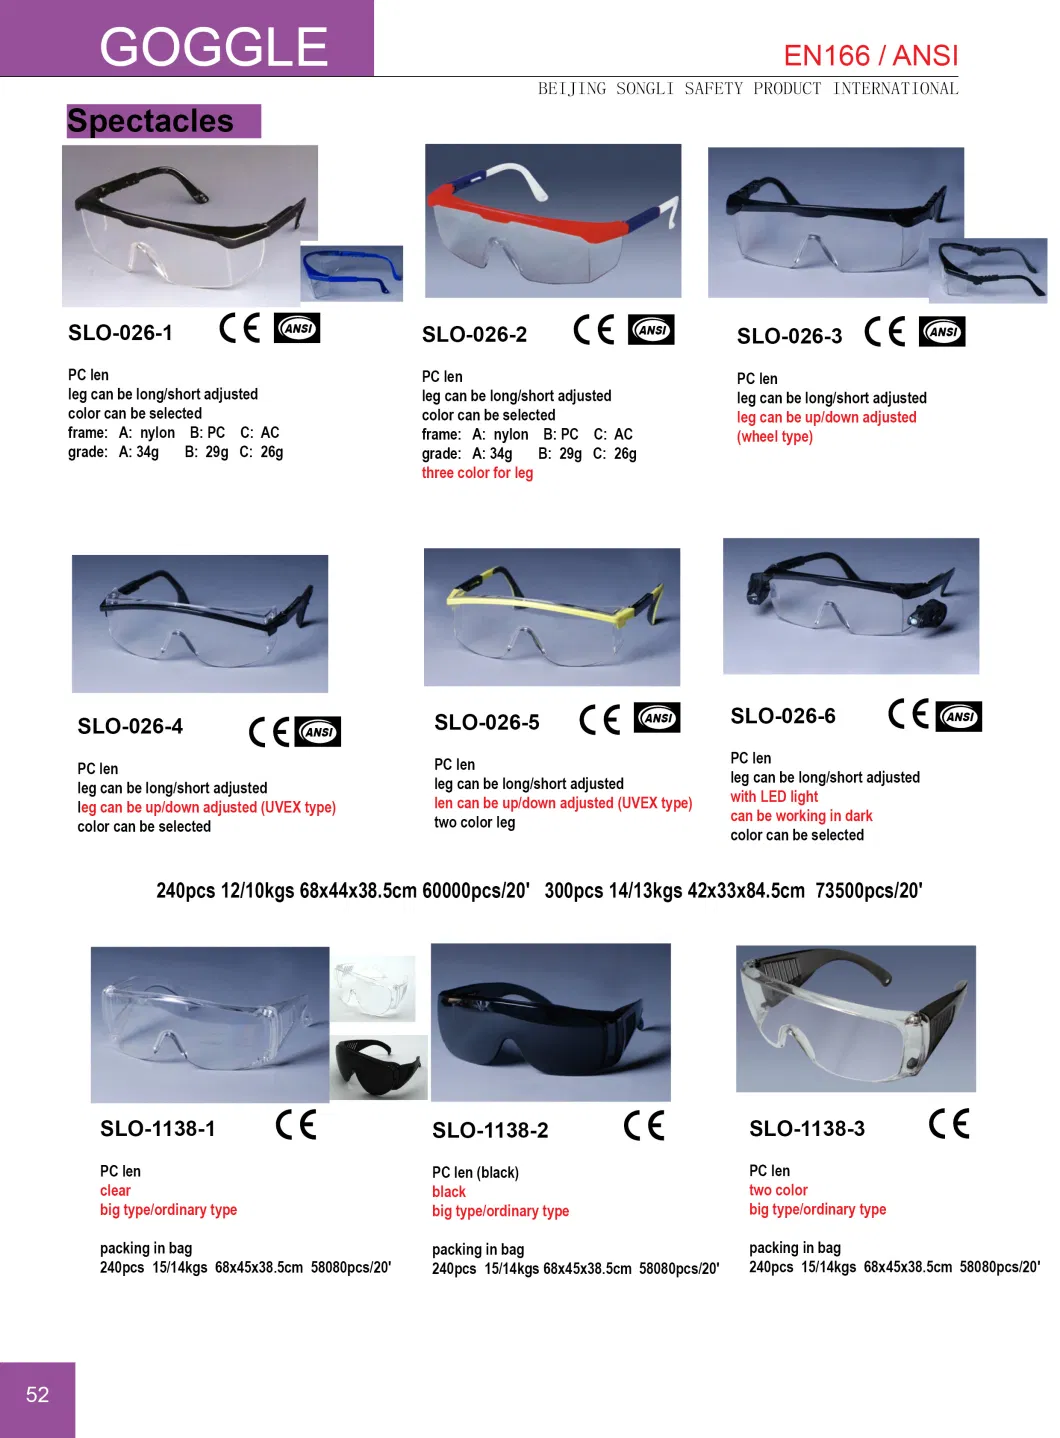 Slo-Y691b Eye Protection Protective Eye Wear Goggle Spectacles Safety Glasses